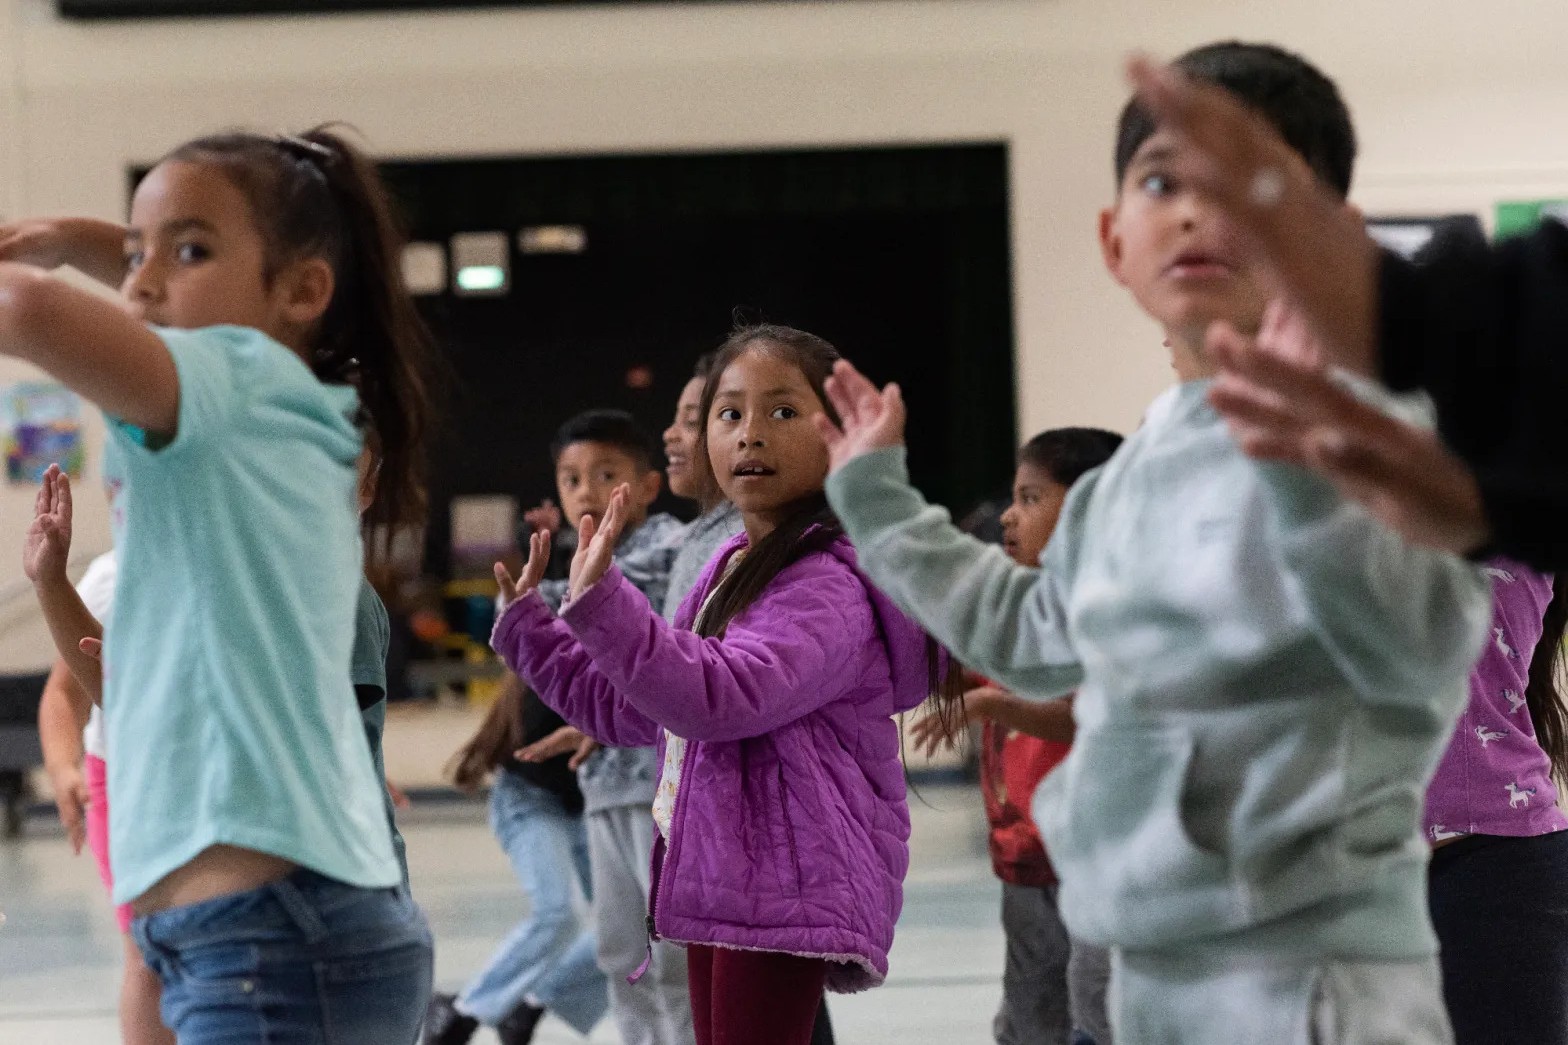 Students are standing with arms raised as part of a hip hop class activity.